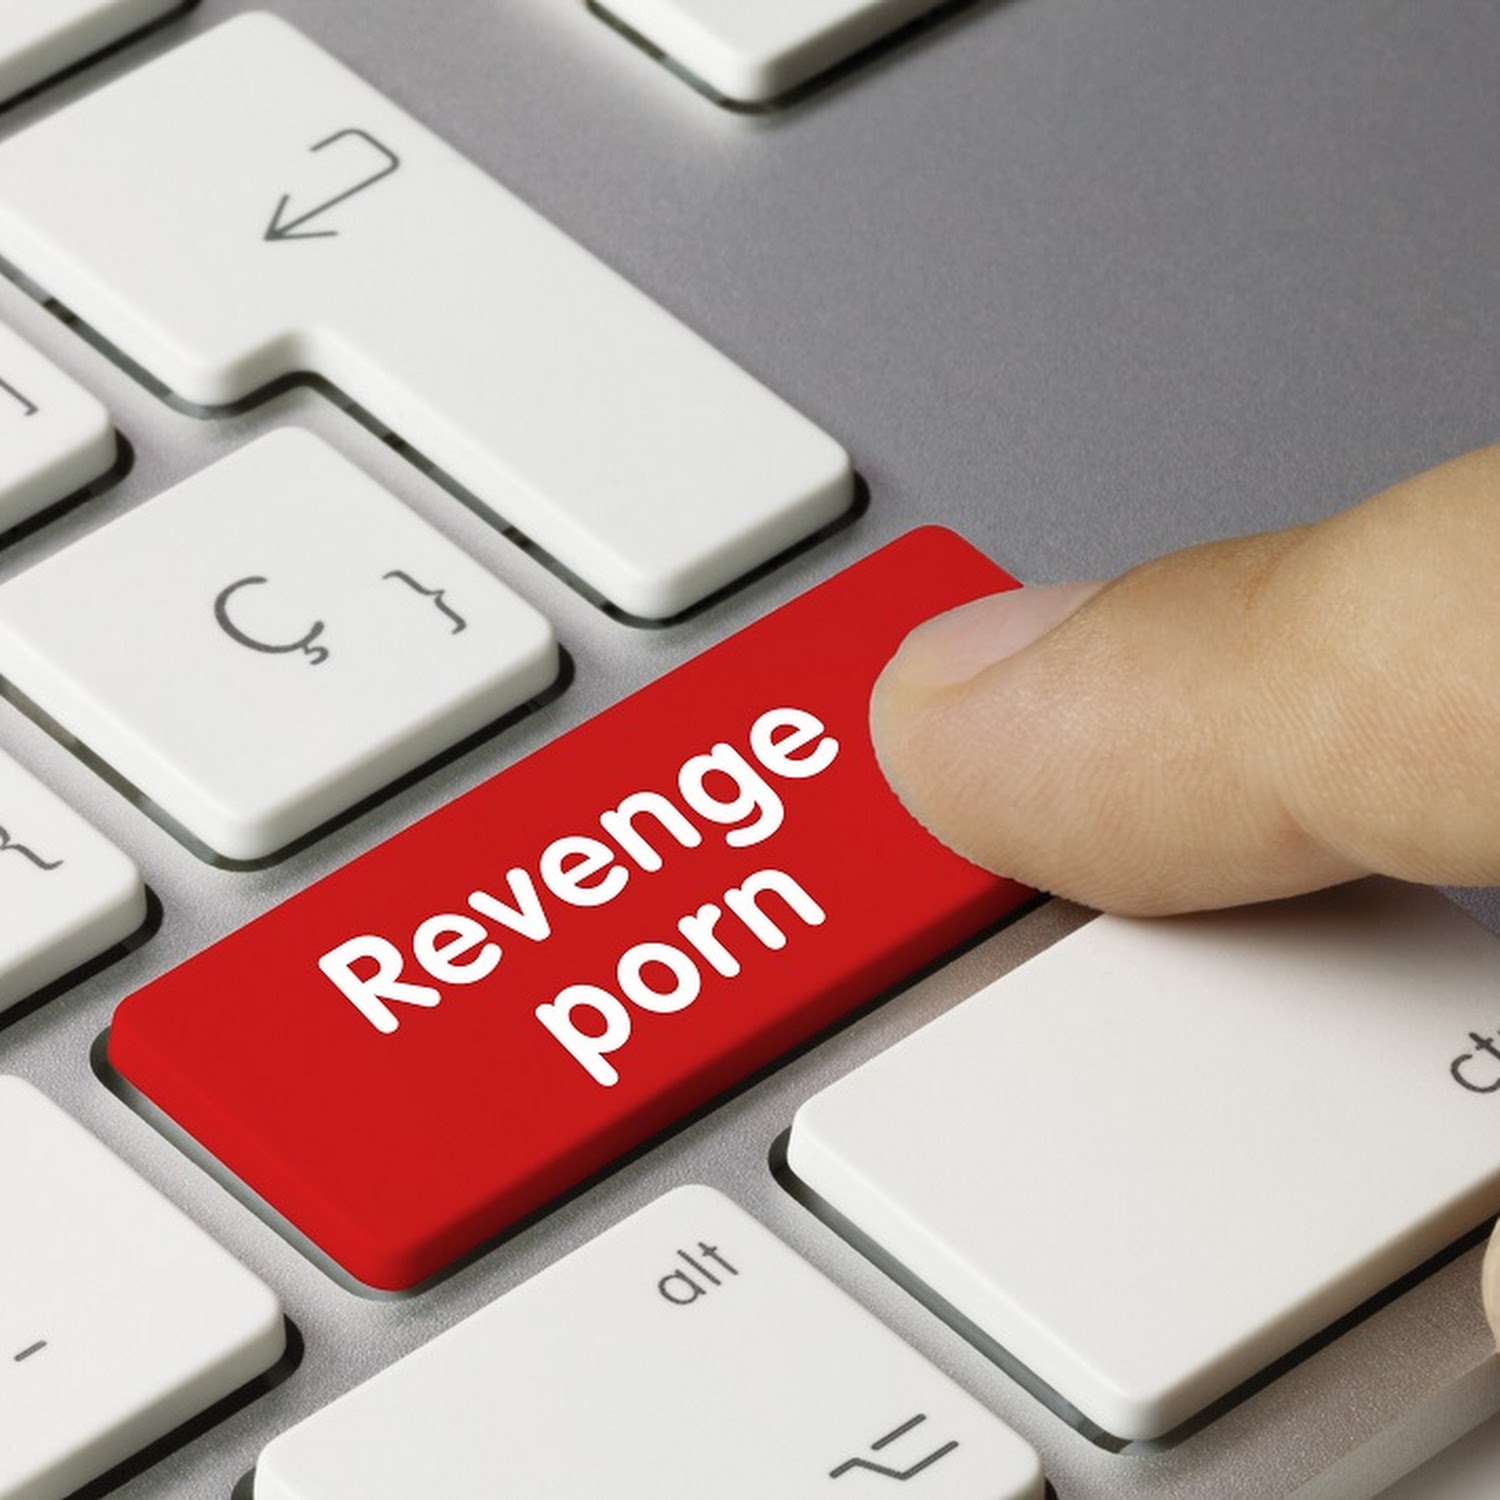 What to do if you're a victim of revenge porn & image-based abuse